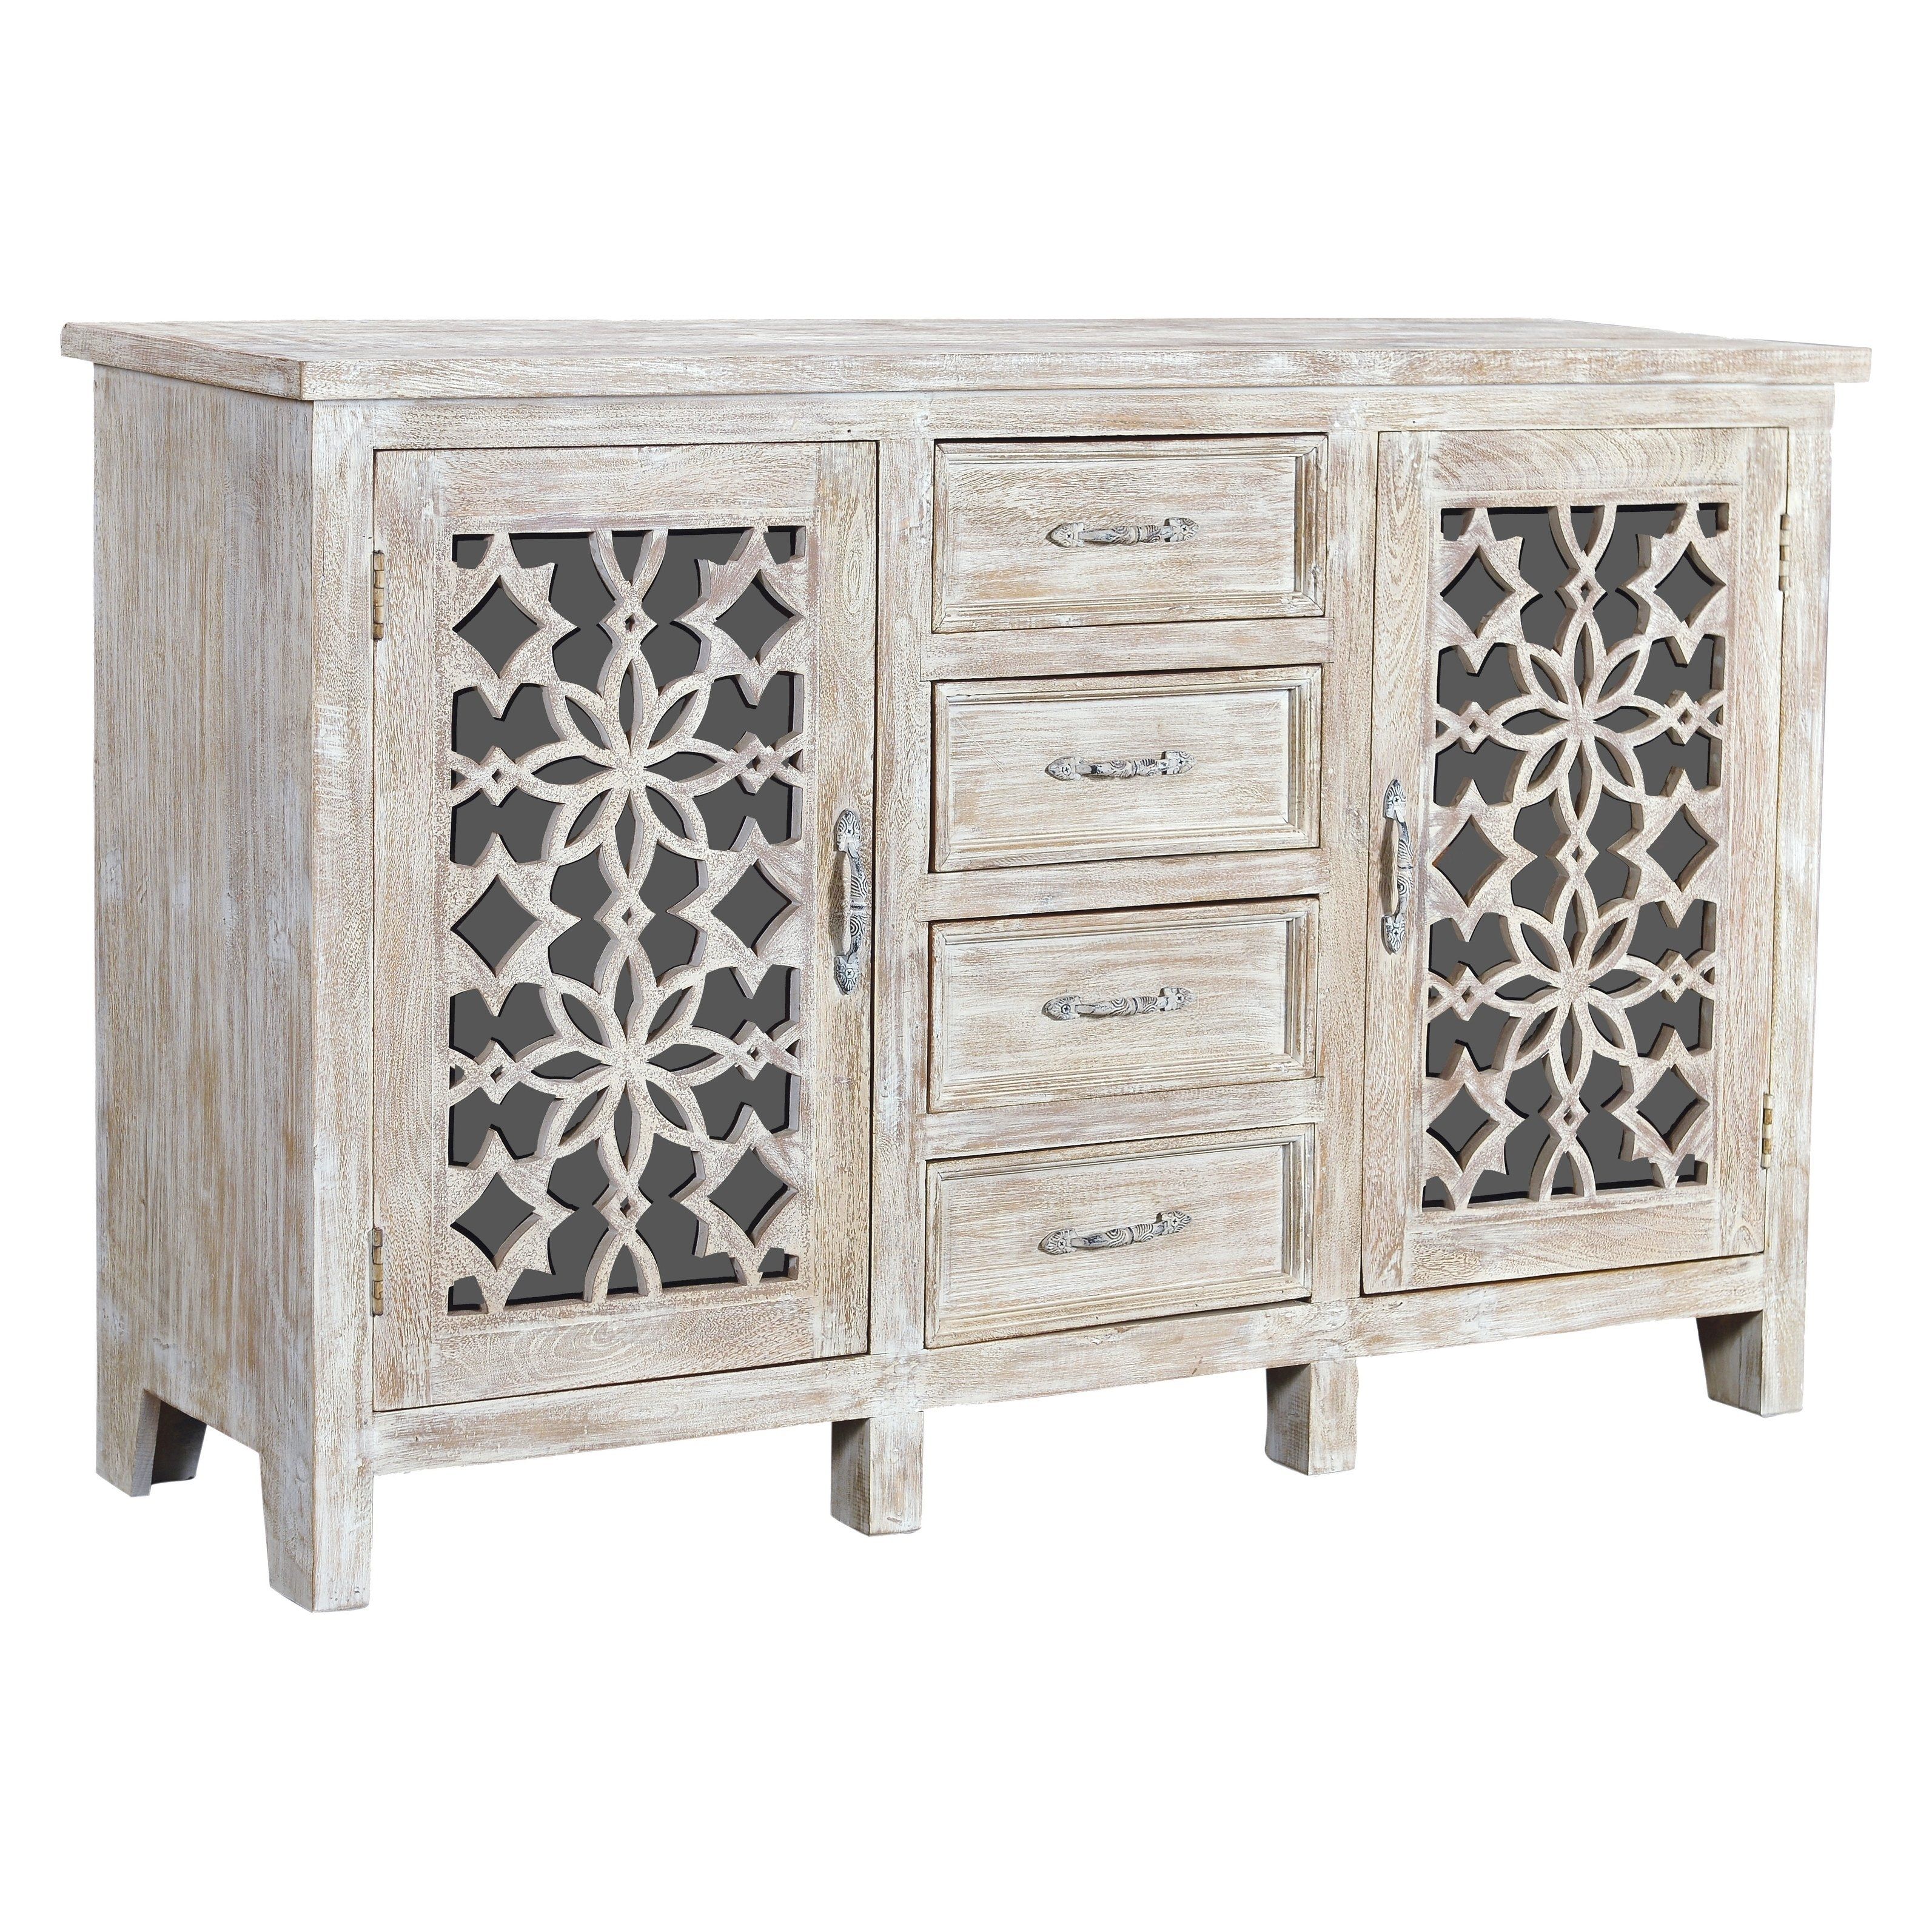 Shop Evan 4 Drawer 2 Door Carved Sideboard – Free Shipping Today For Latest Antique White Distressed 3 Drawer/2 Door Sideboards (View 16 of 20)